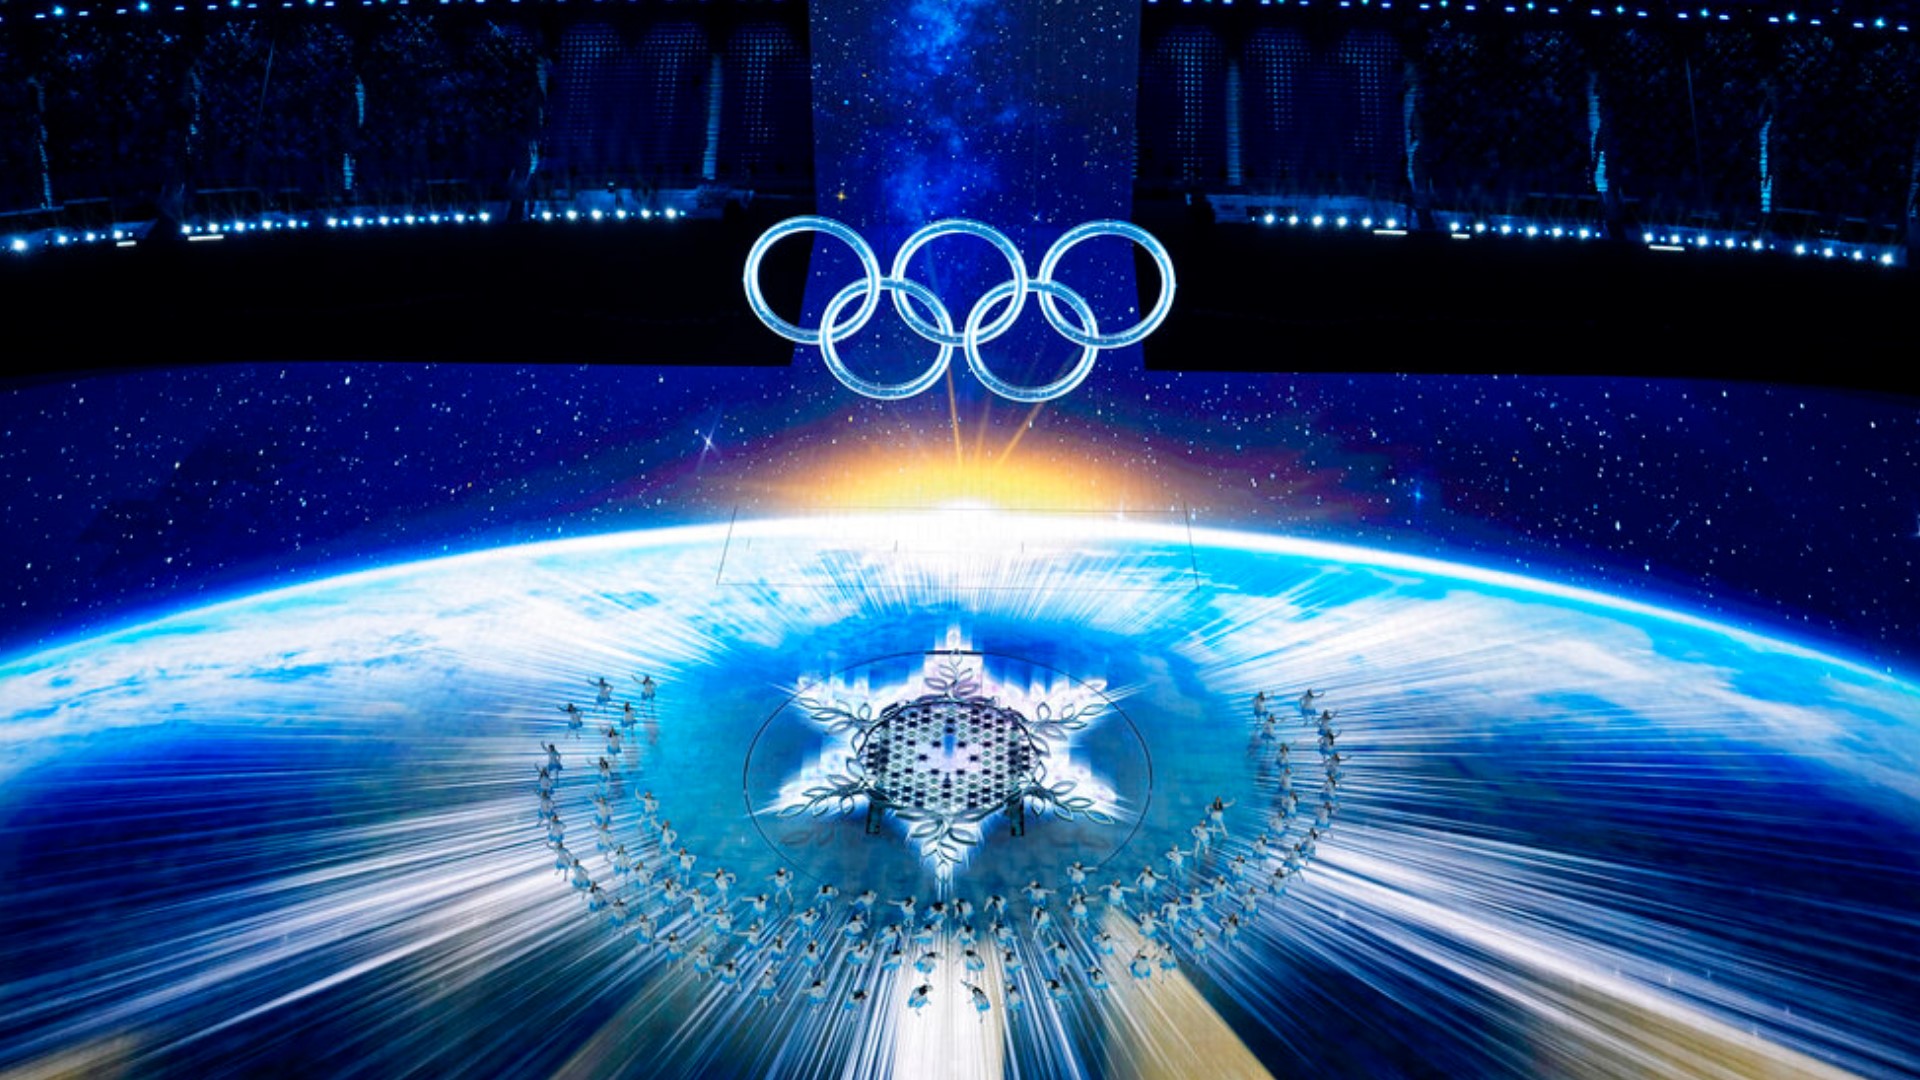 The Opening Ceremony kicked off the Winter Olympics while much of America was sleeping.